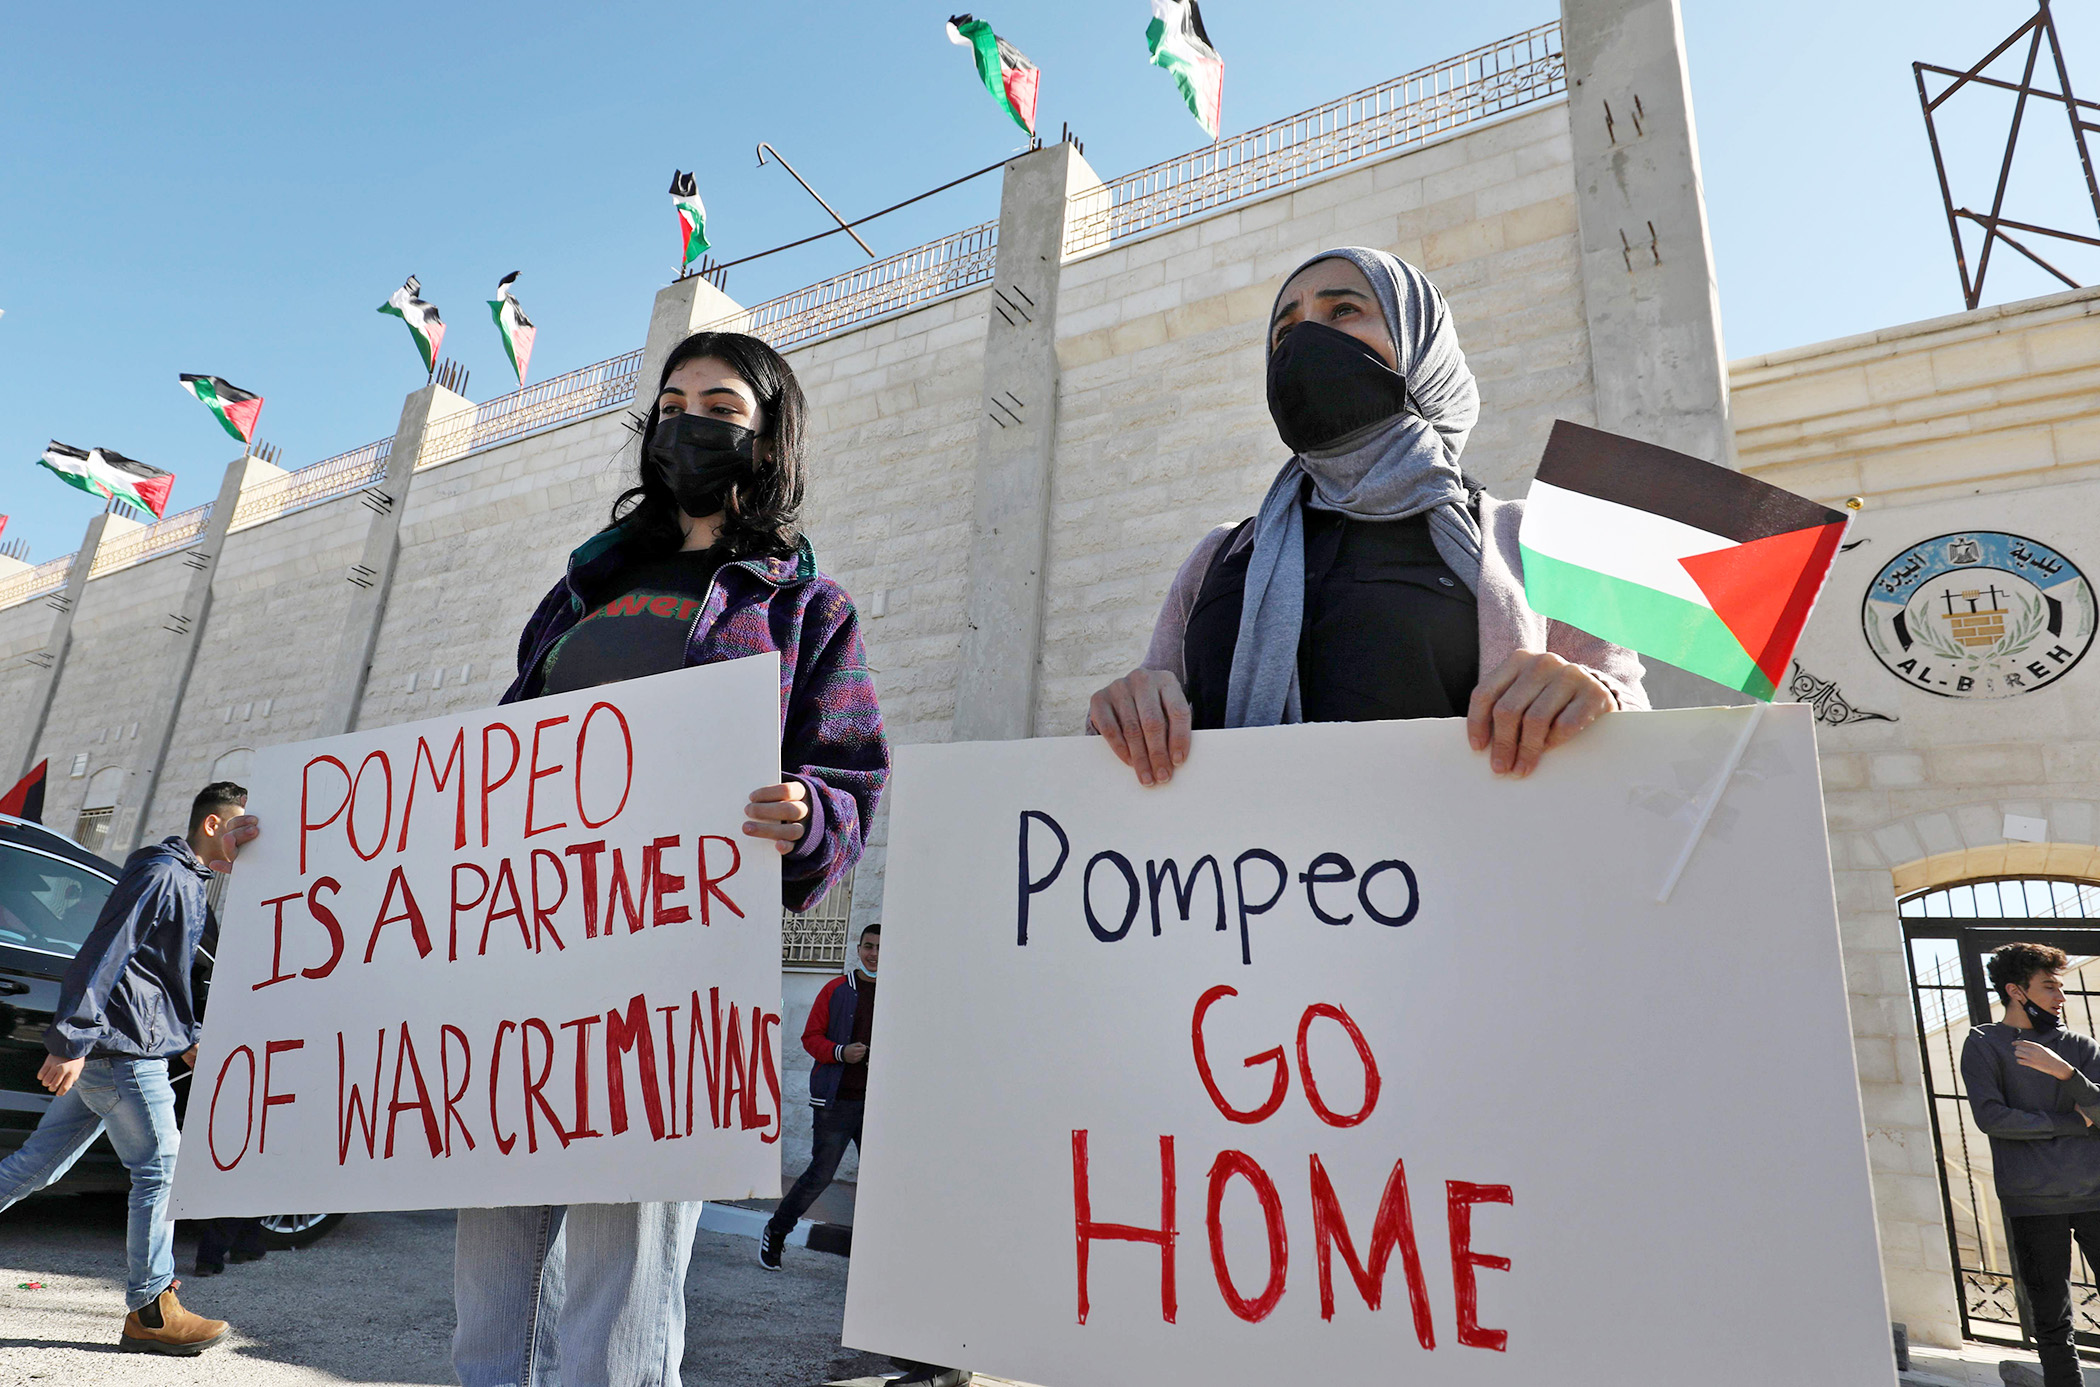 PHOTO: Palestinians demonstrate near the Israeli settlement of Psagot, built on the lands of the city of al-Bireh, against the visit by US Secretary of State's to the settlement in the occupied West Bank, Nov. 18, 2020.